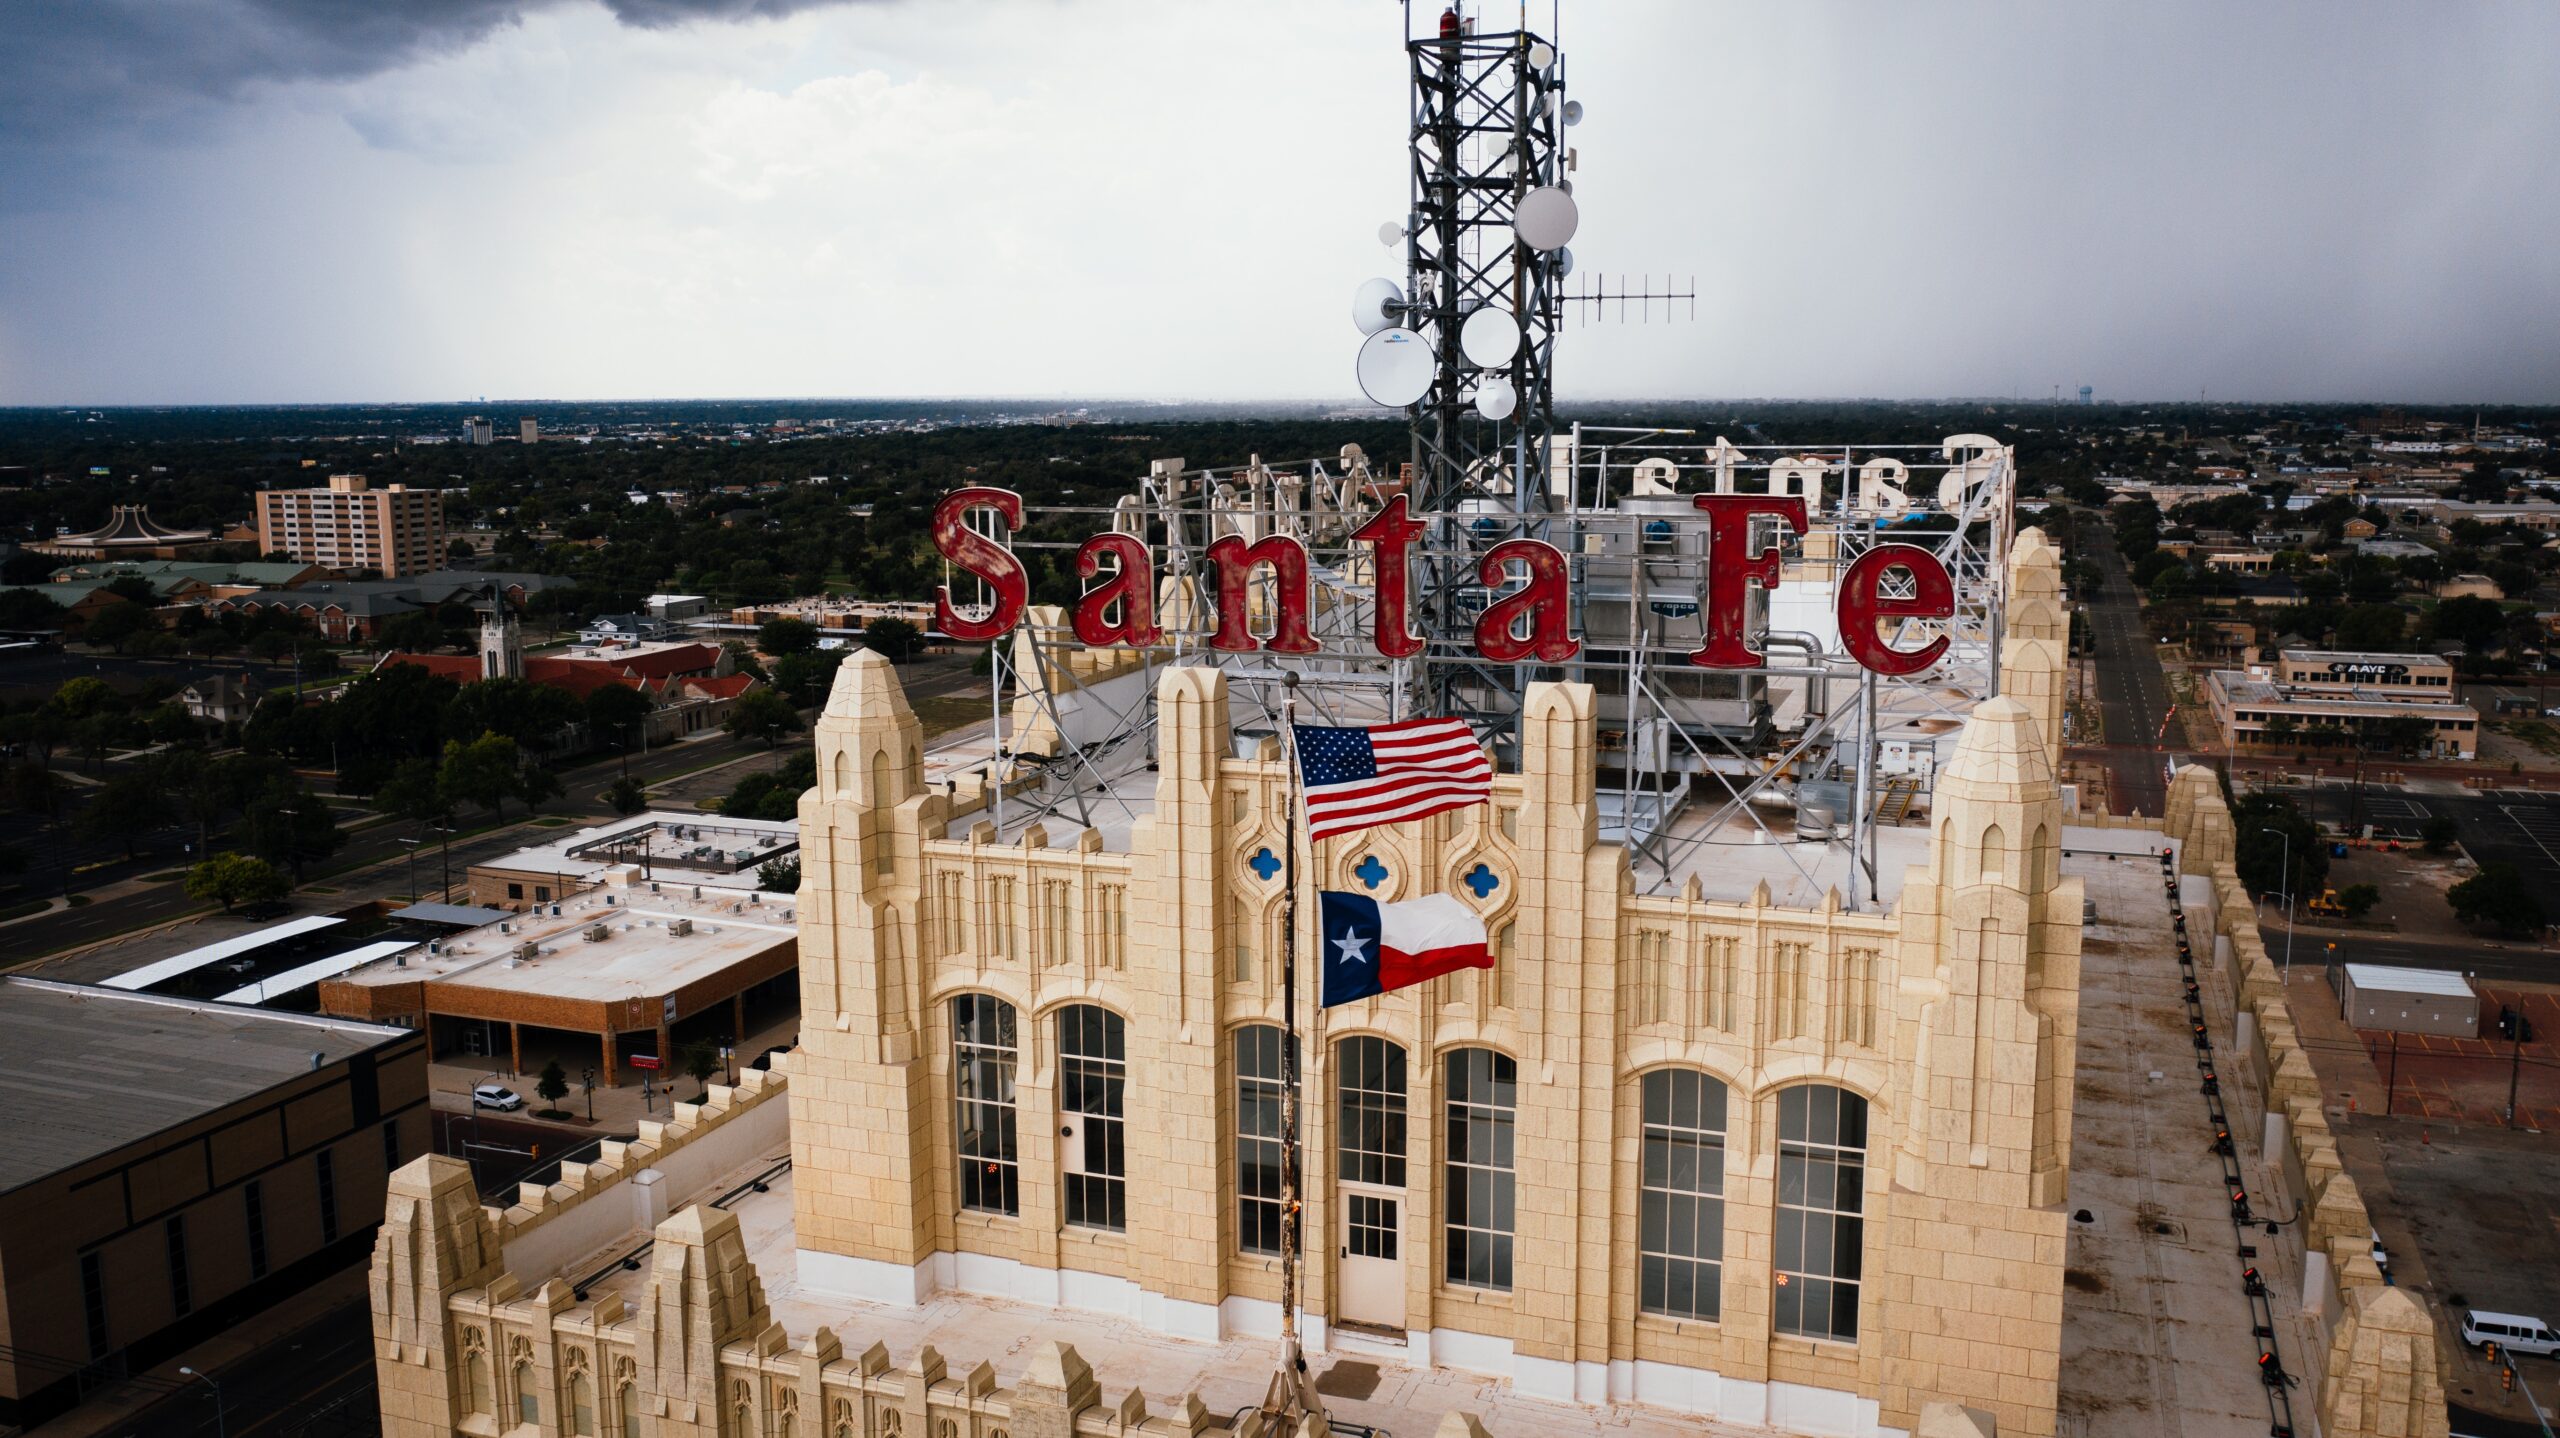 building with a Sante Fe sign and the Texas state flag in front of it